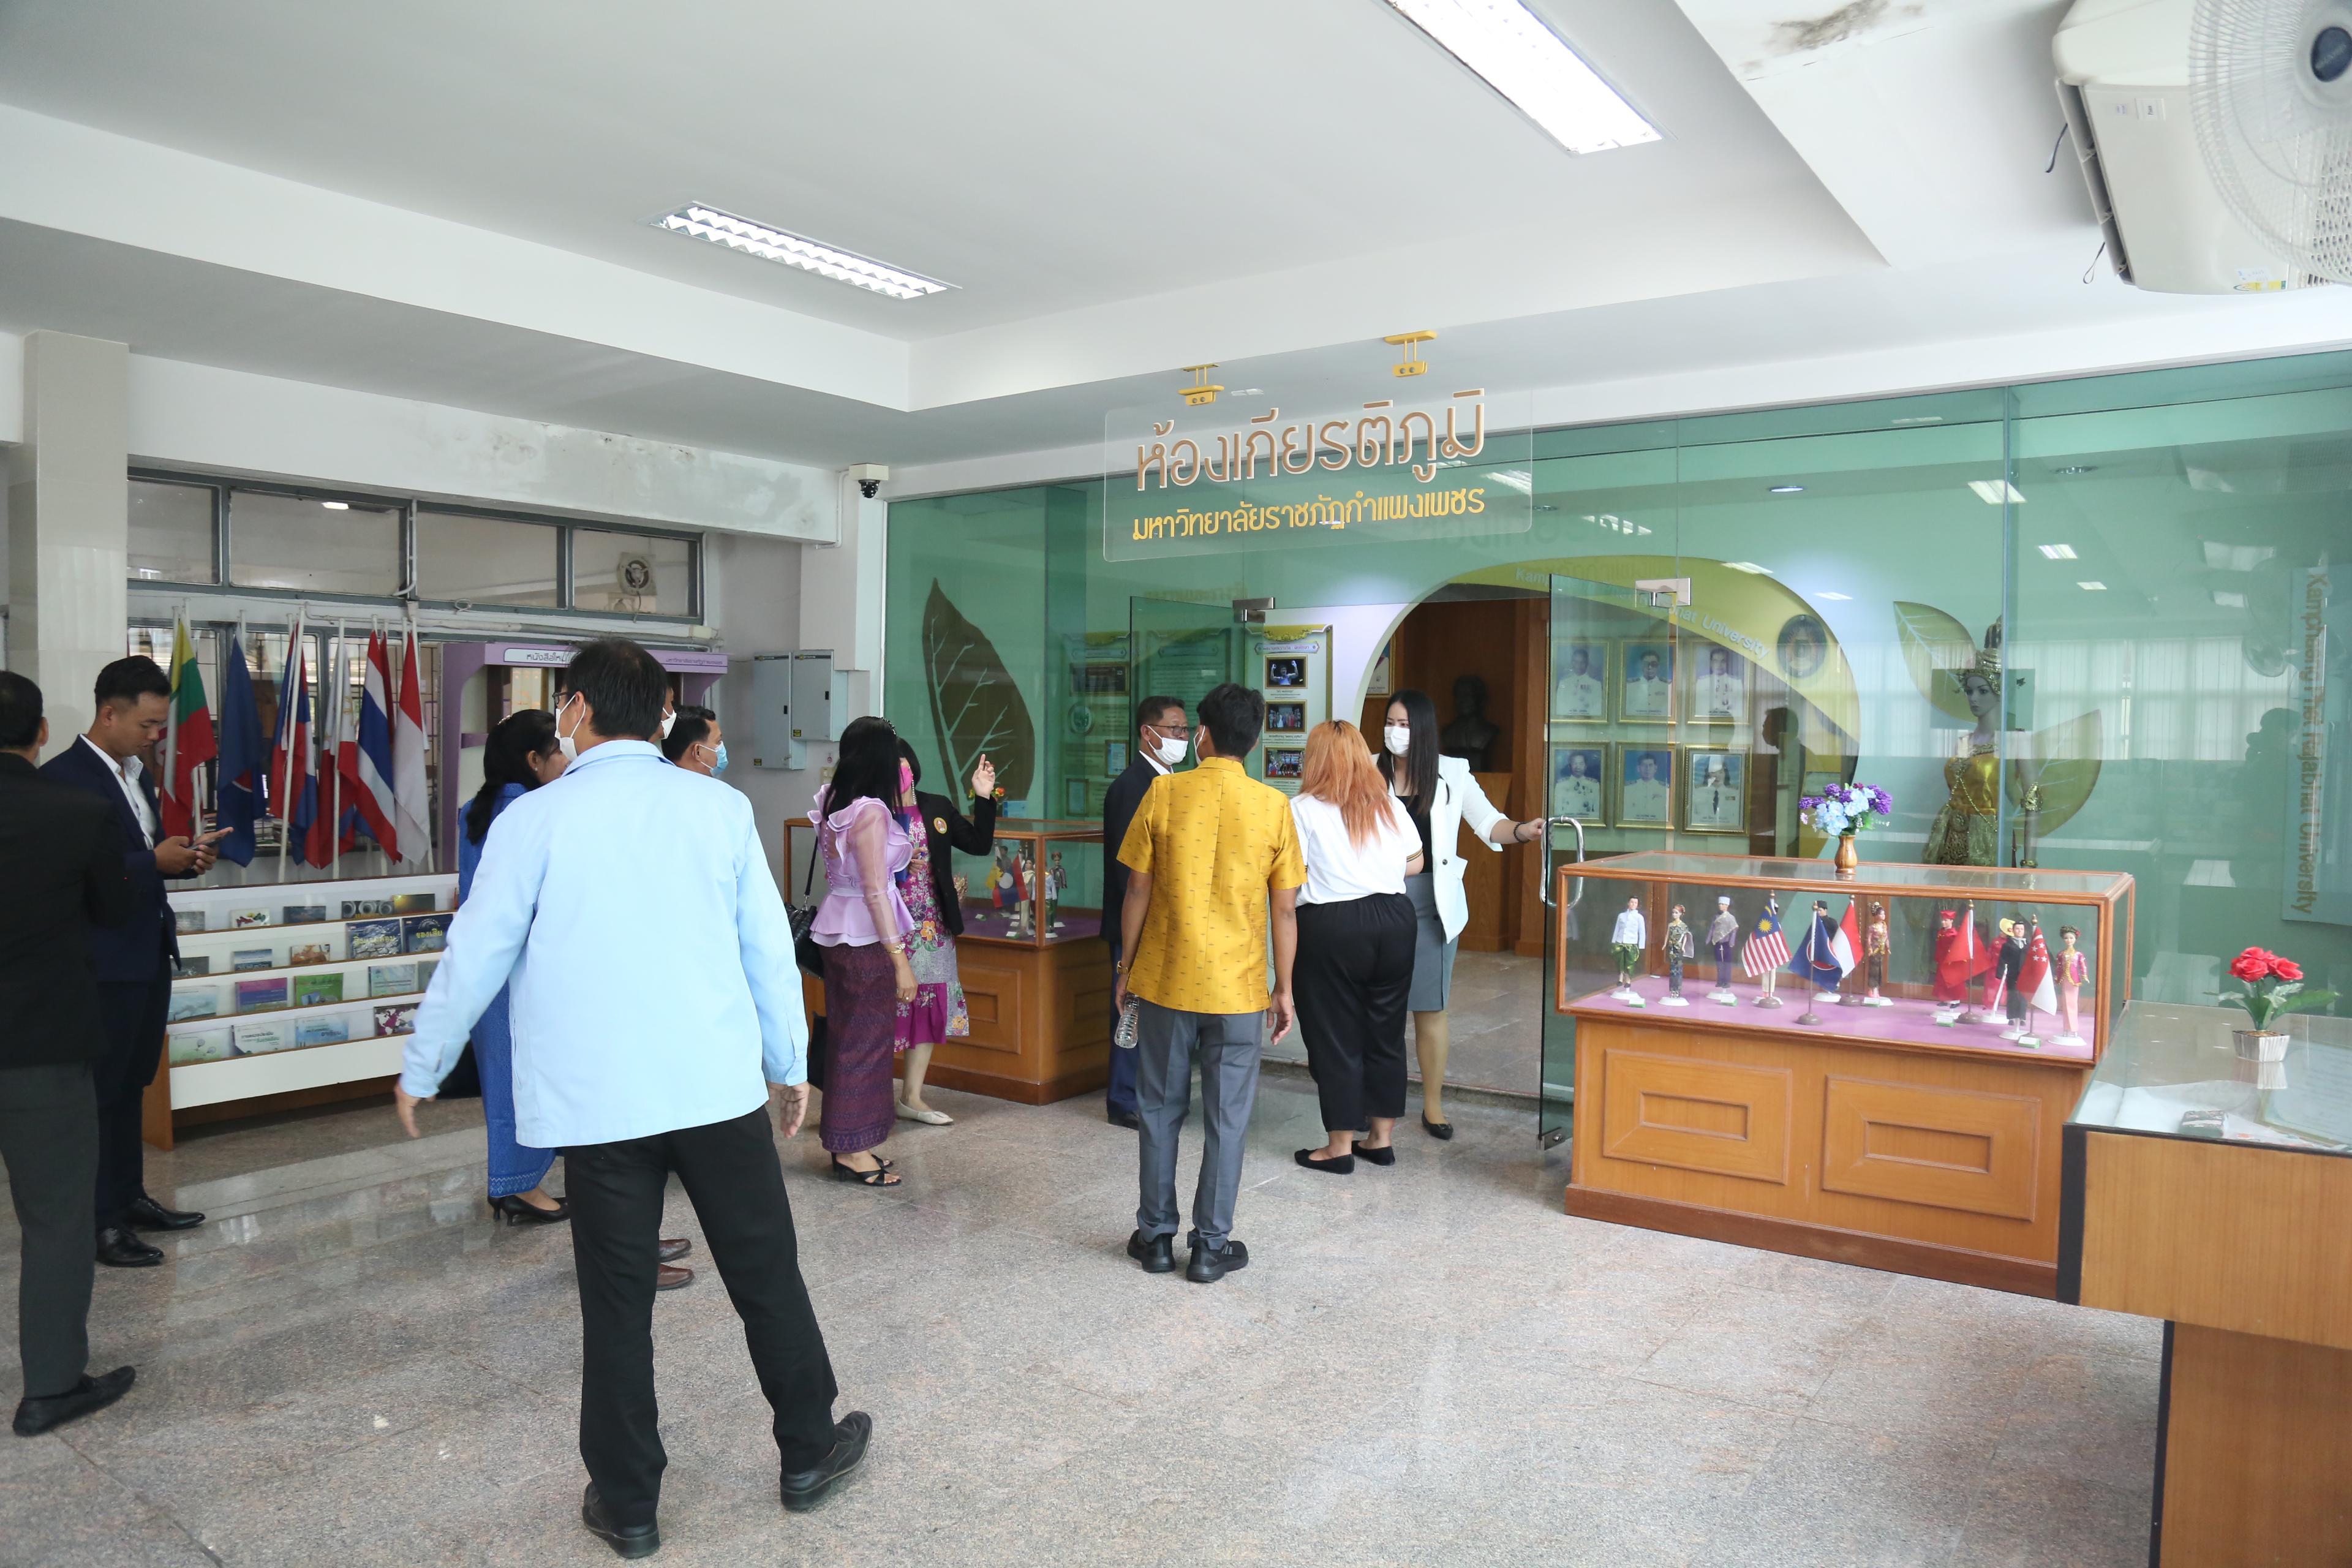 4. WELCOME KINGDOM OF CAMBODIA PROVINCIAL TEACHER TRAINING COLLEGE TO OFFICE OF ACADEMIC RESOURCES AND INFORMATION TECHNOLOGY KAMPHAENG PHET RAJABHAT UNIVERSITY